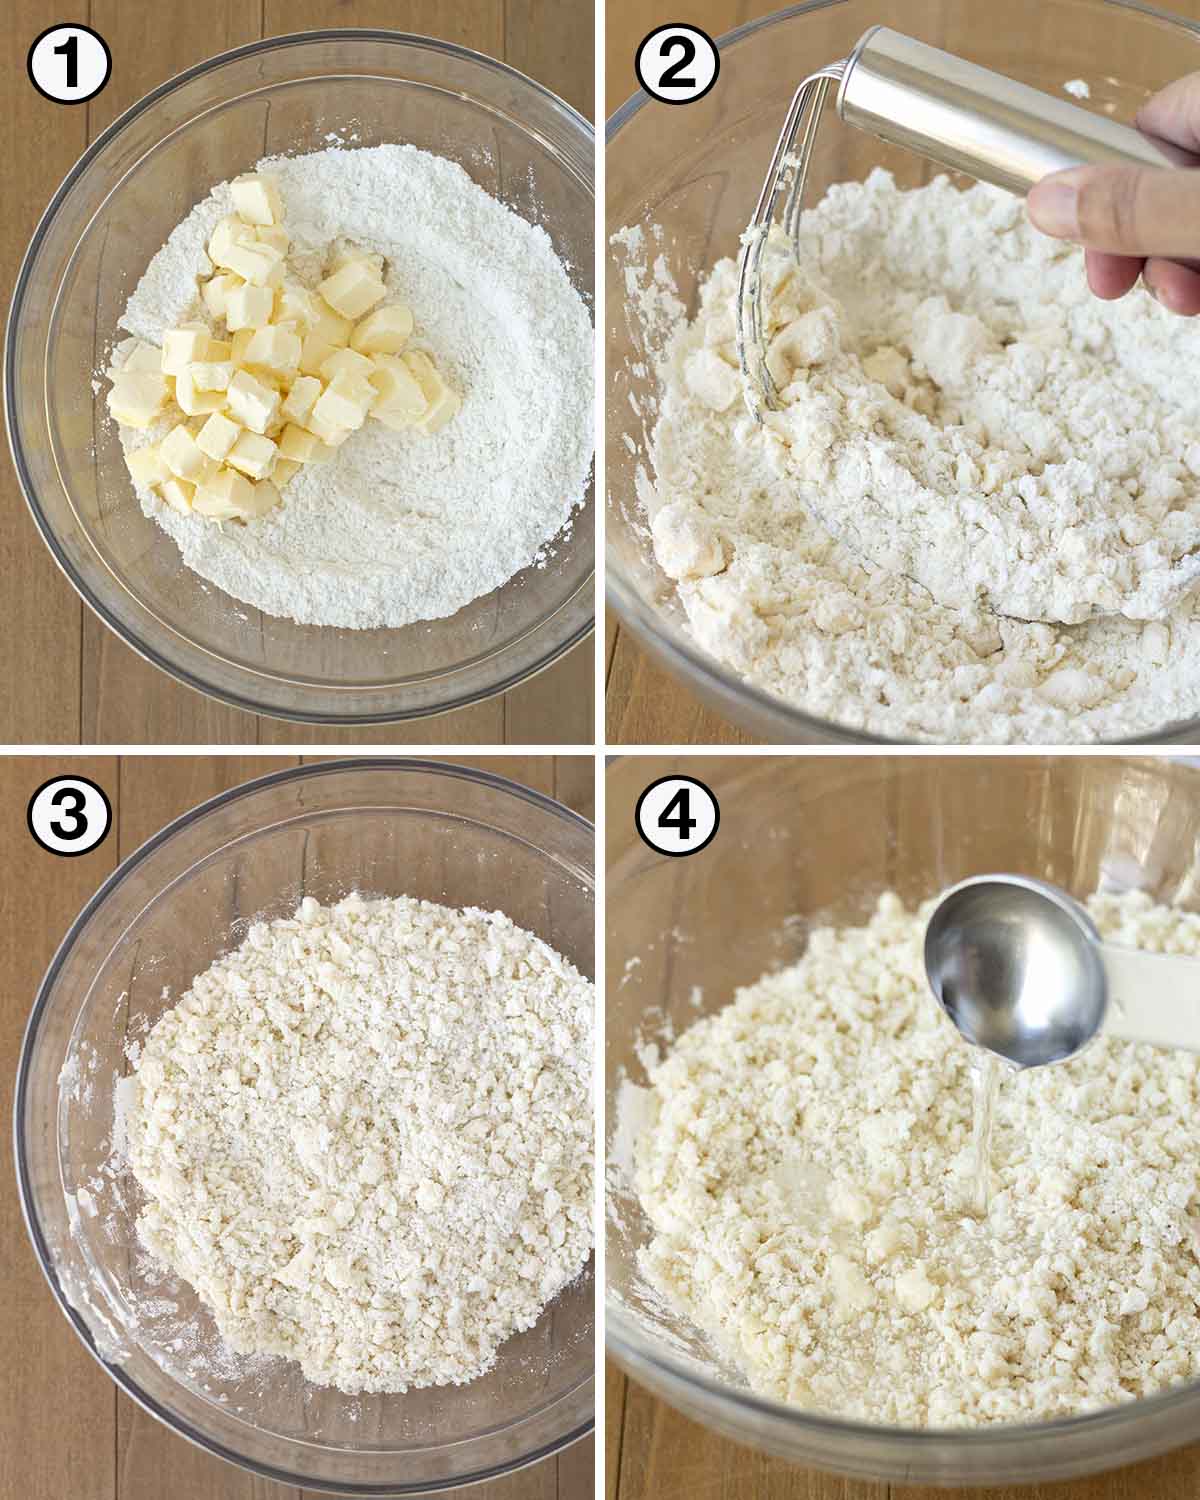 A collage of four images showing the first sequence of steps needed to make a gluten free dairy free pie crust.